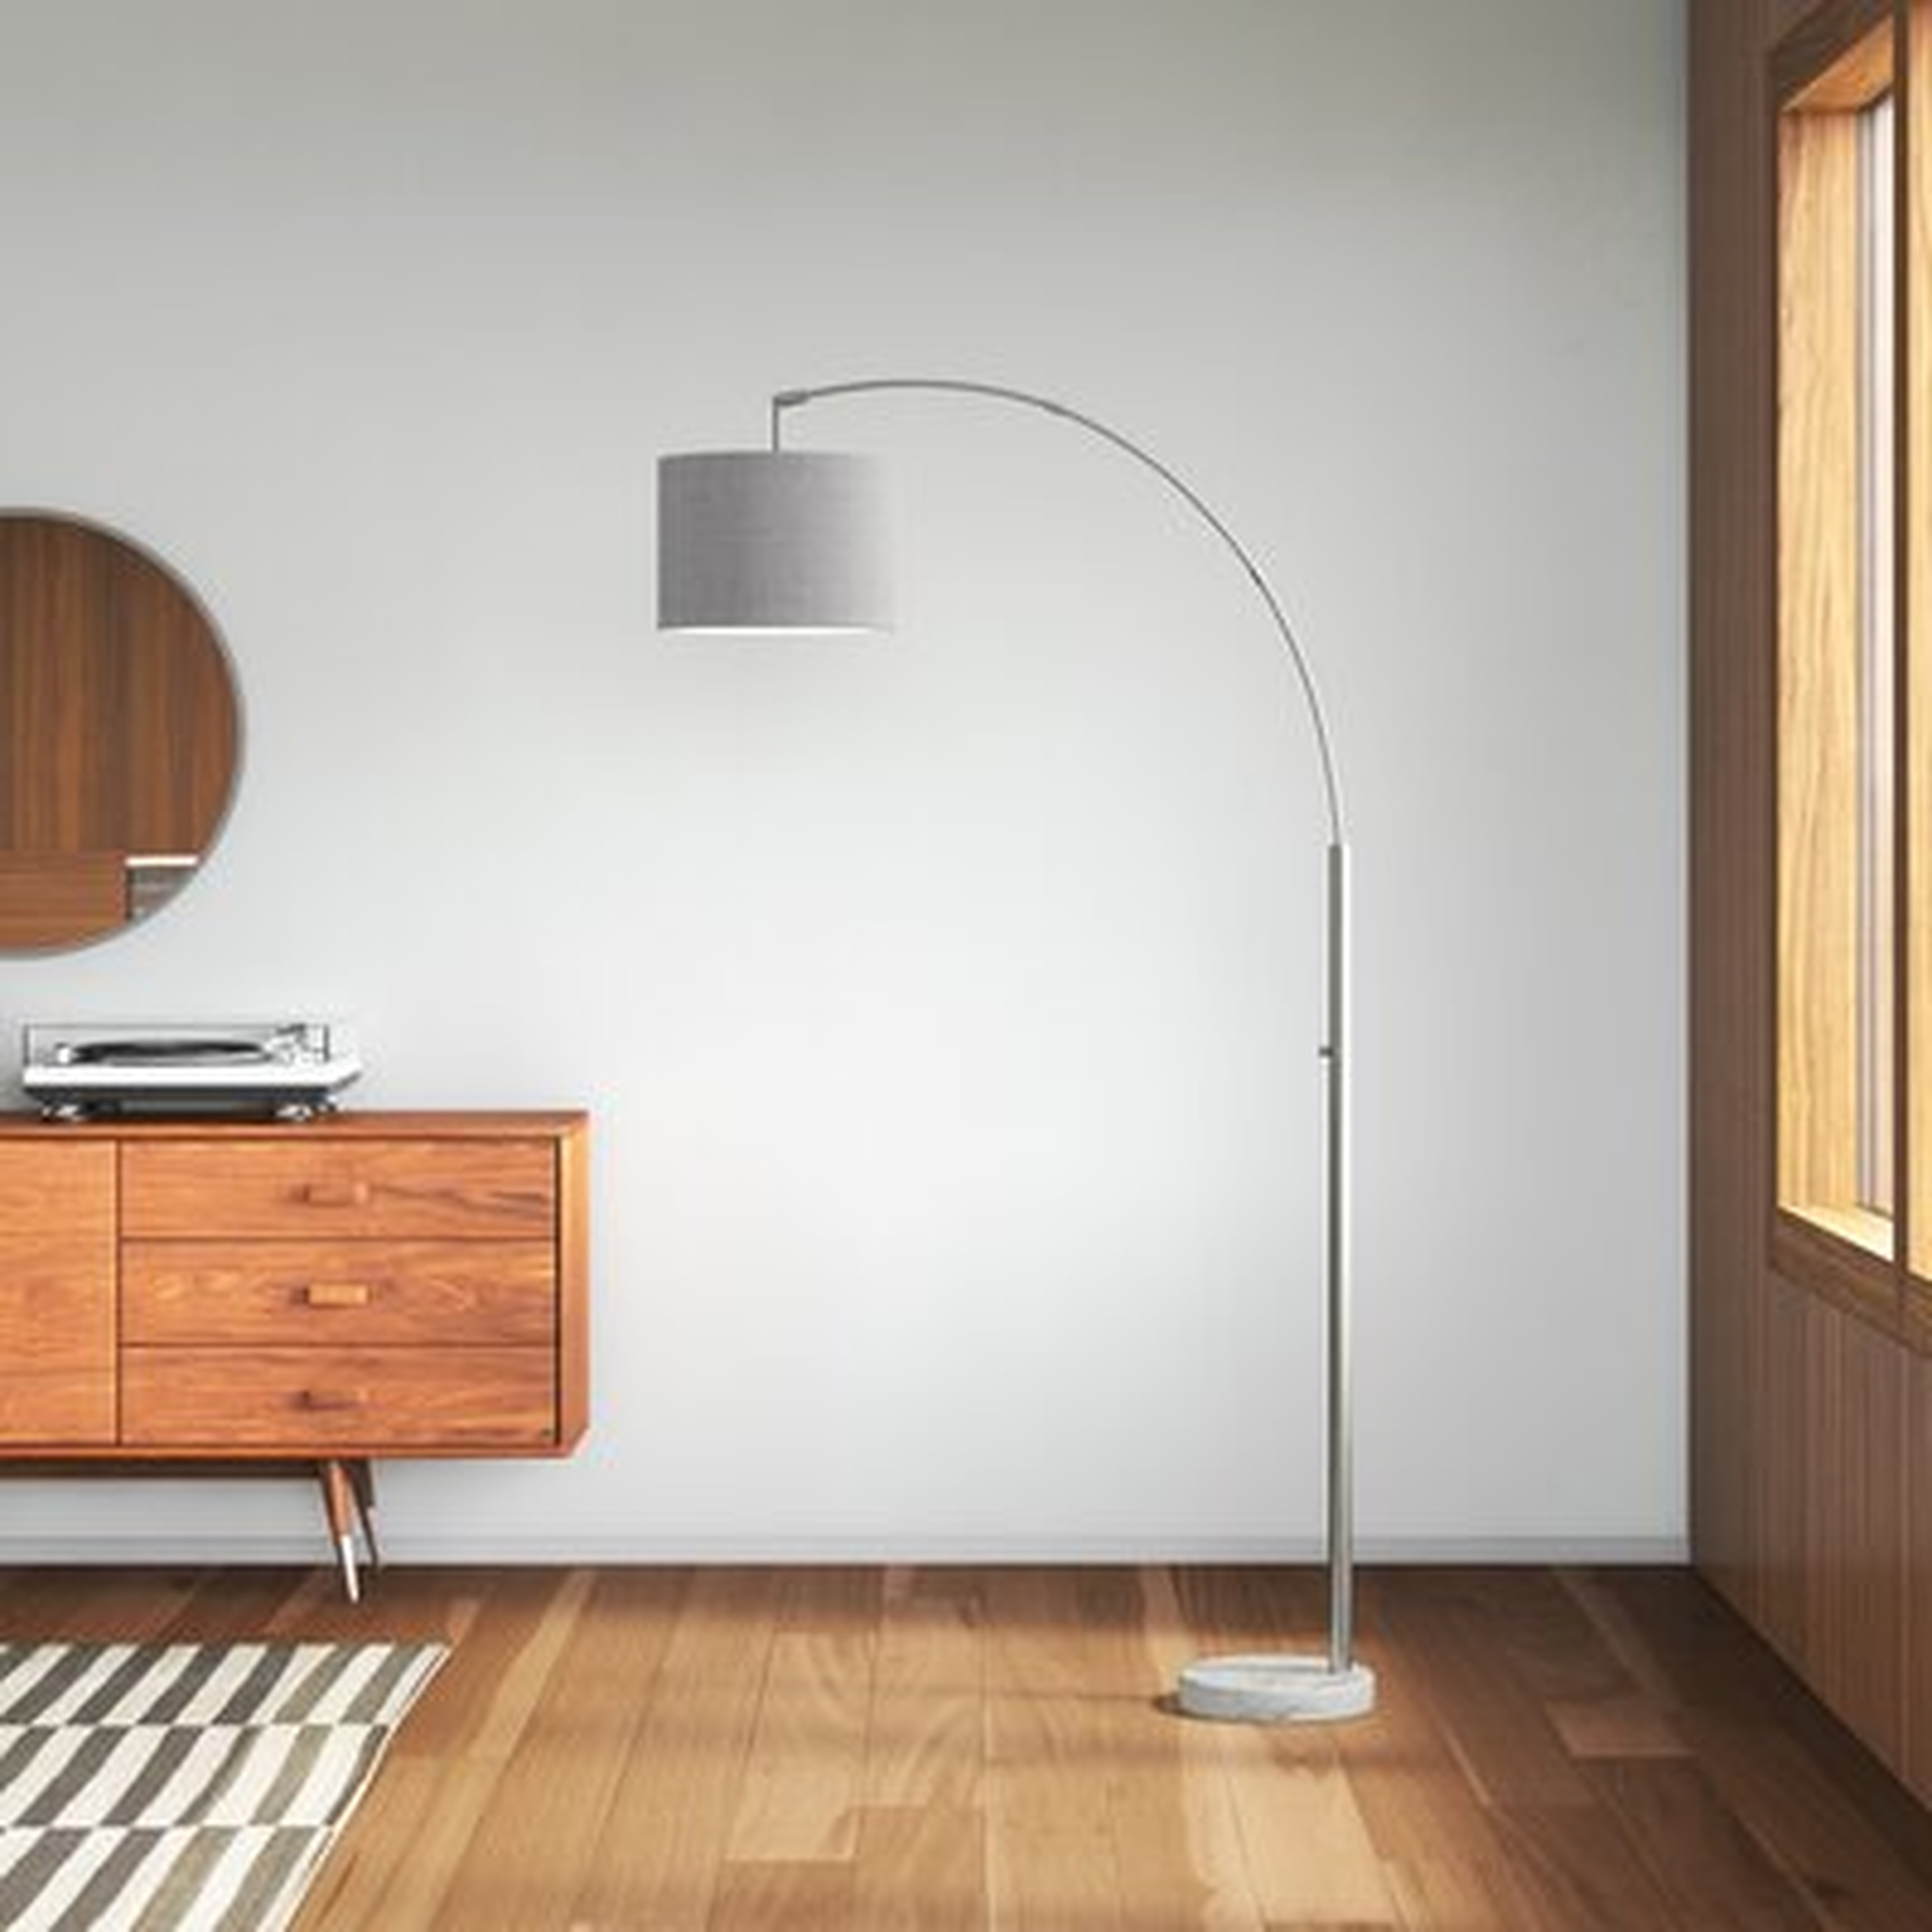 Montes 73.5" Arched Floor Lamp - AllModern